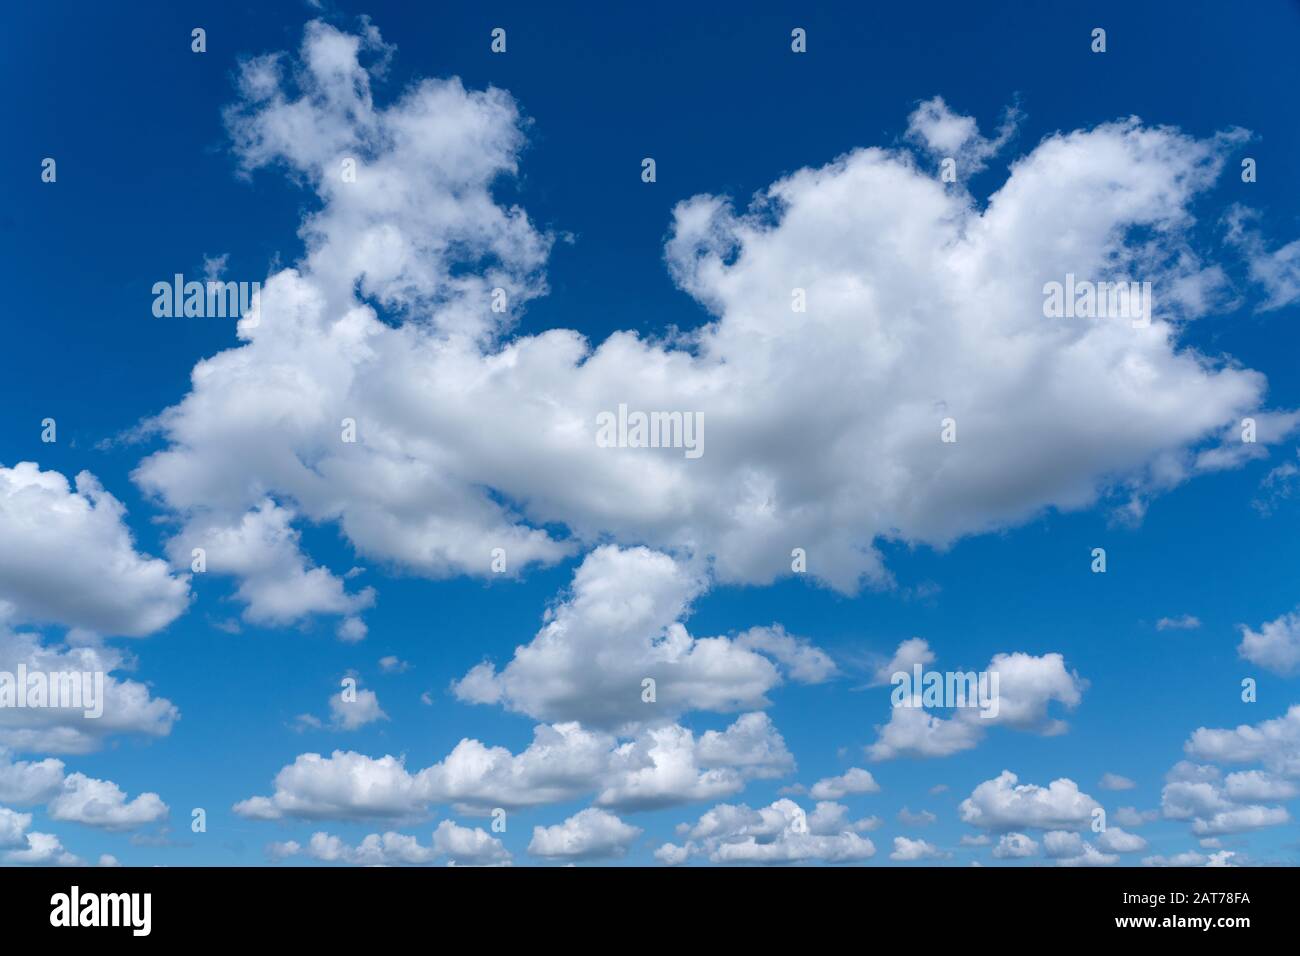 Fluffy white clouds against a deep blue sky Stock Photo